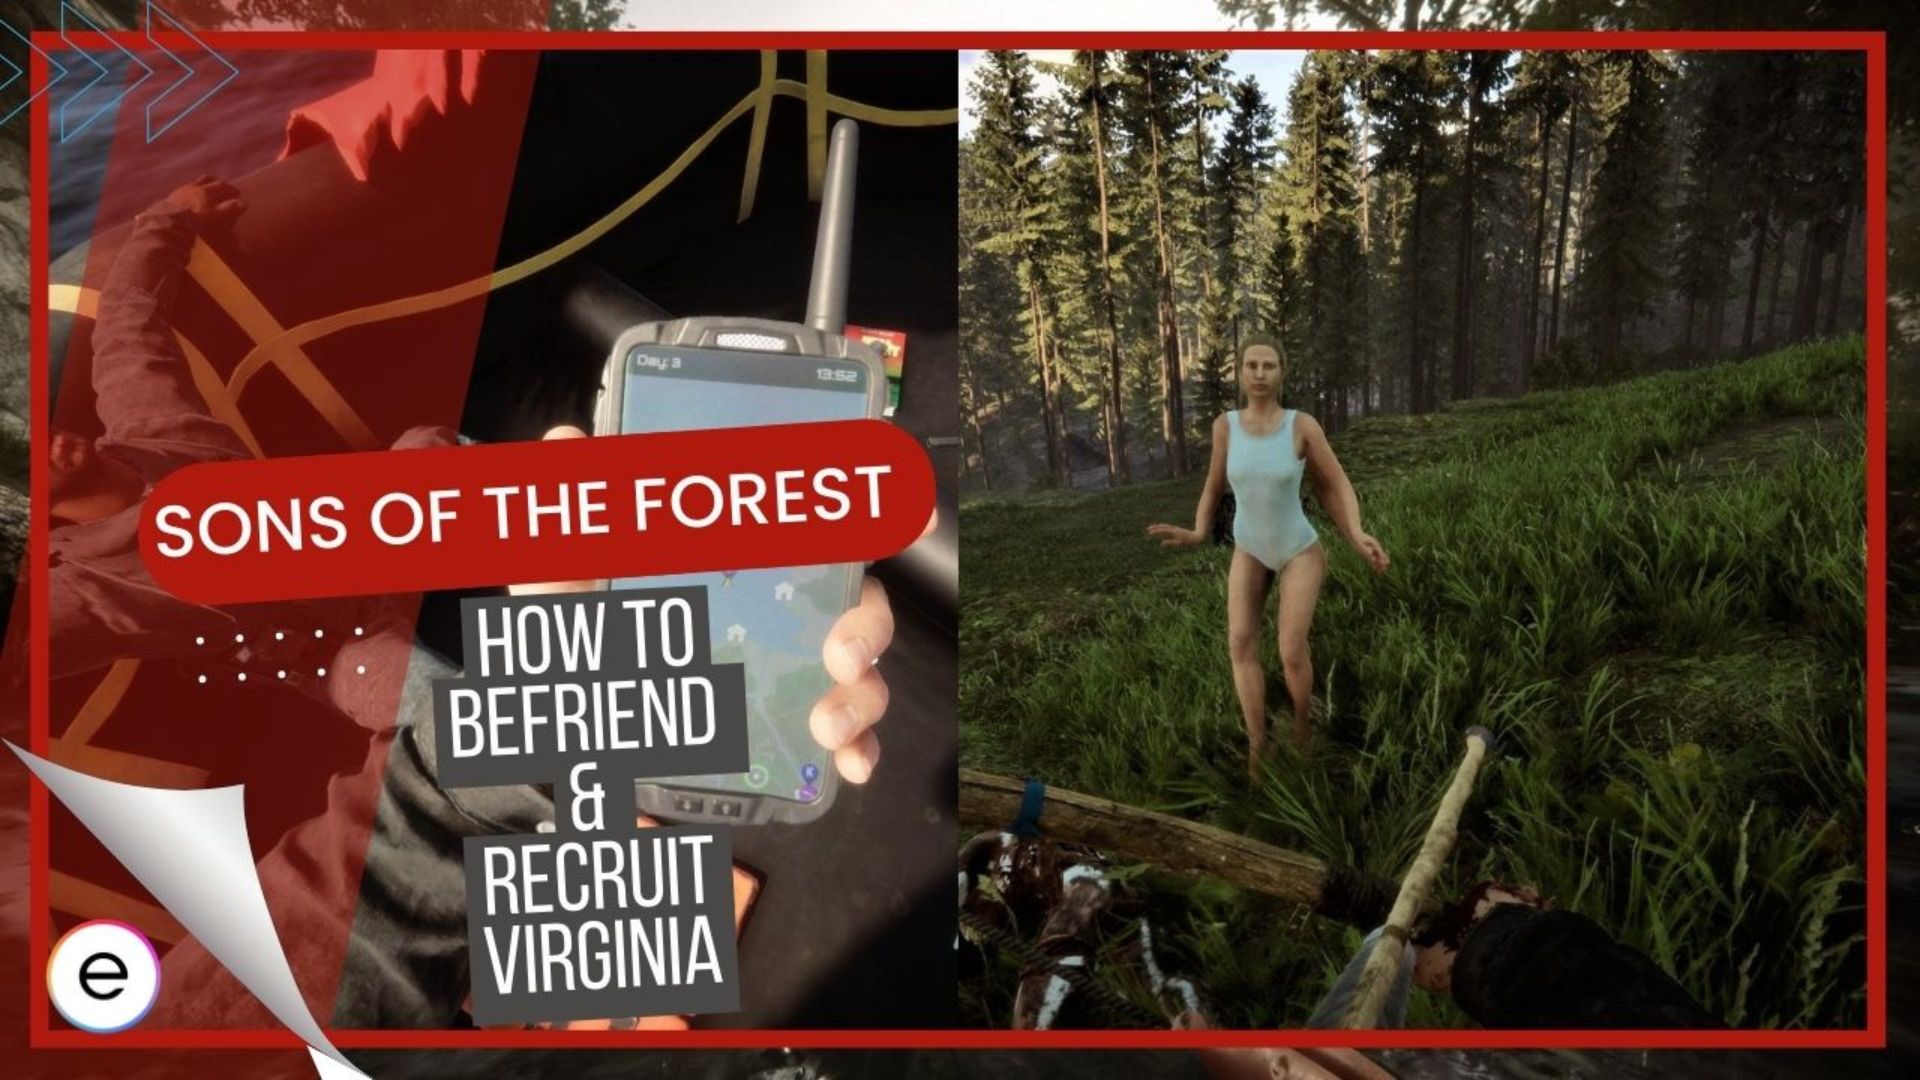 How to befriend Virginia in Sons of the Forest